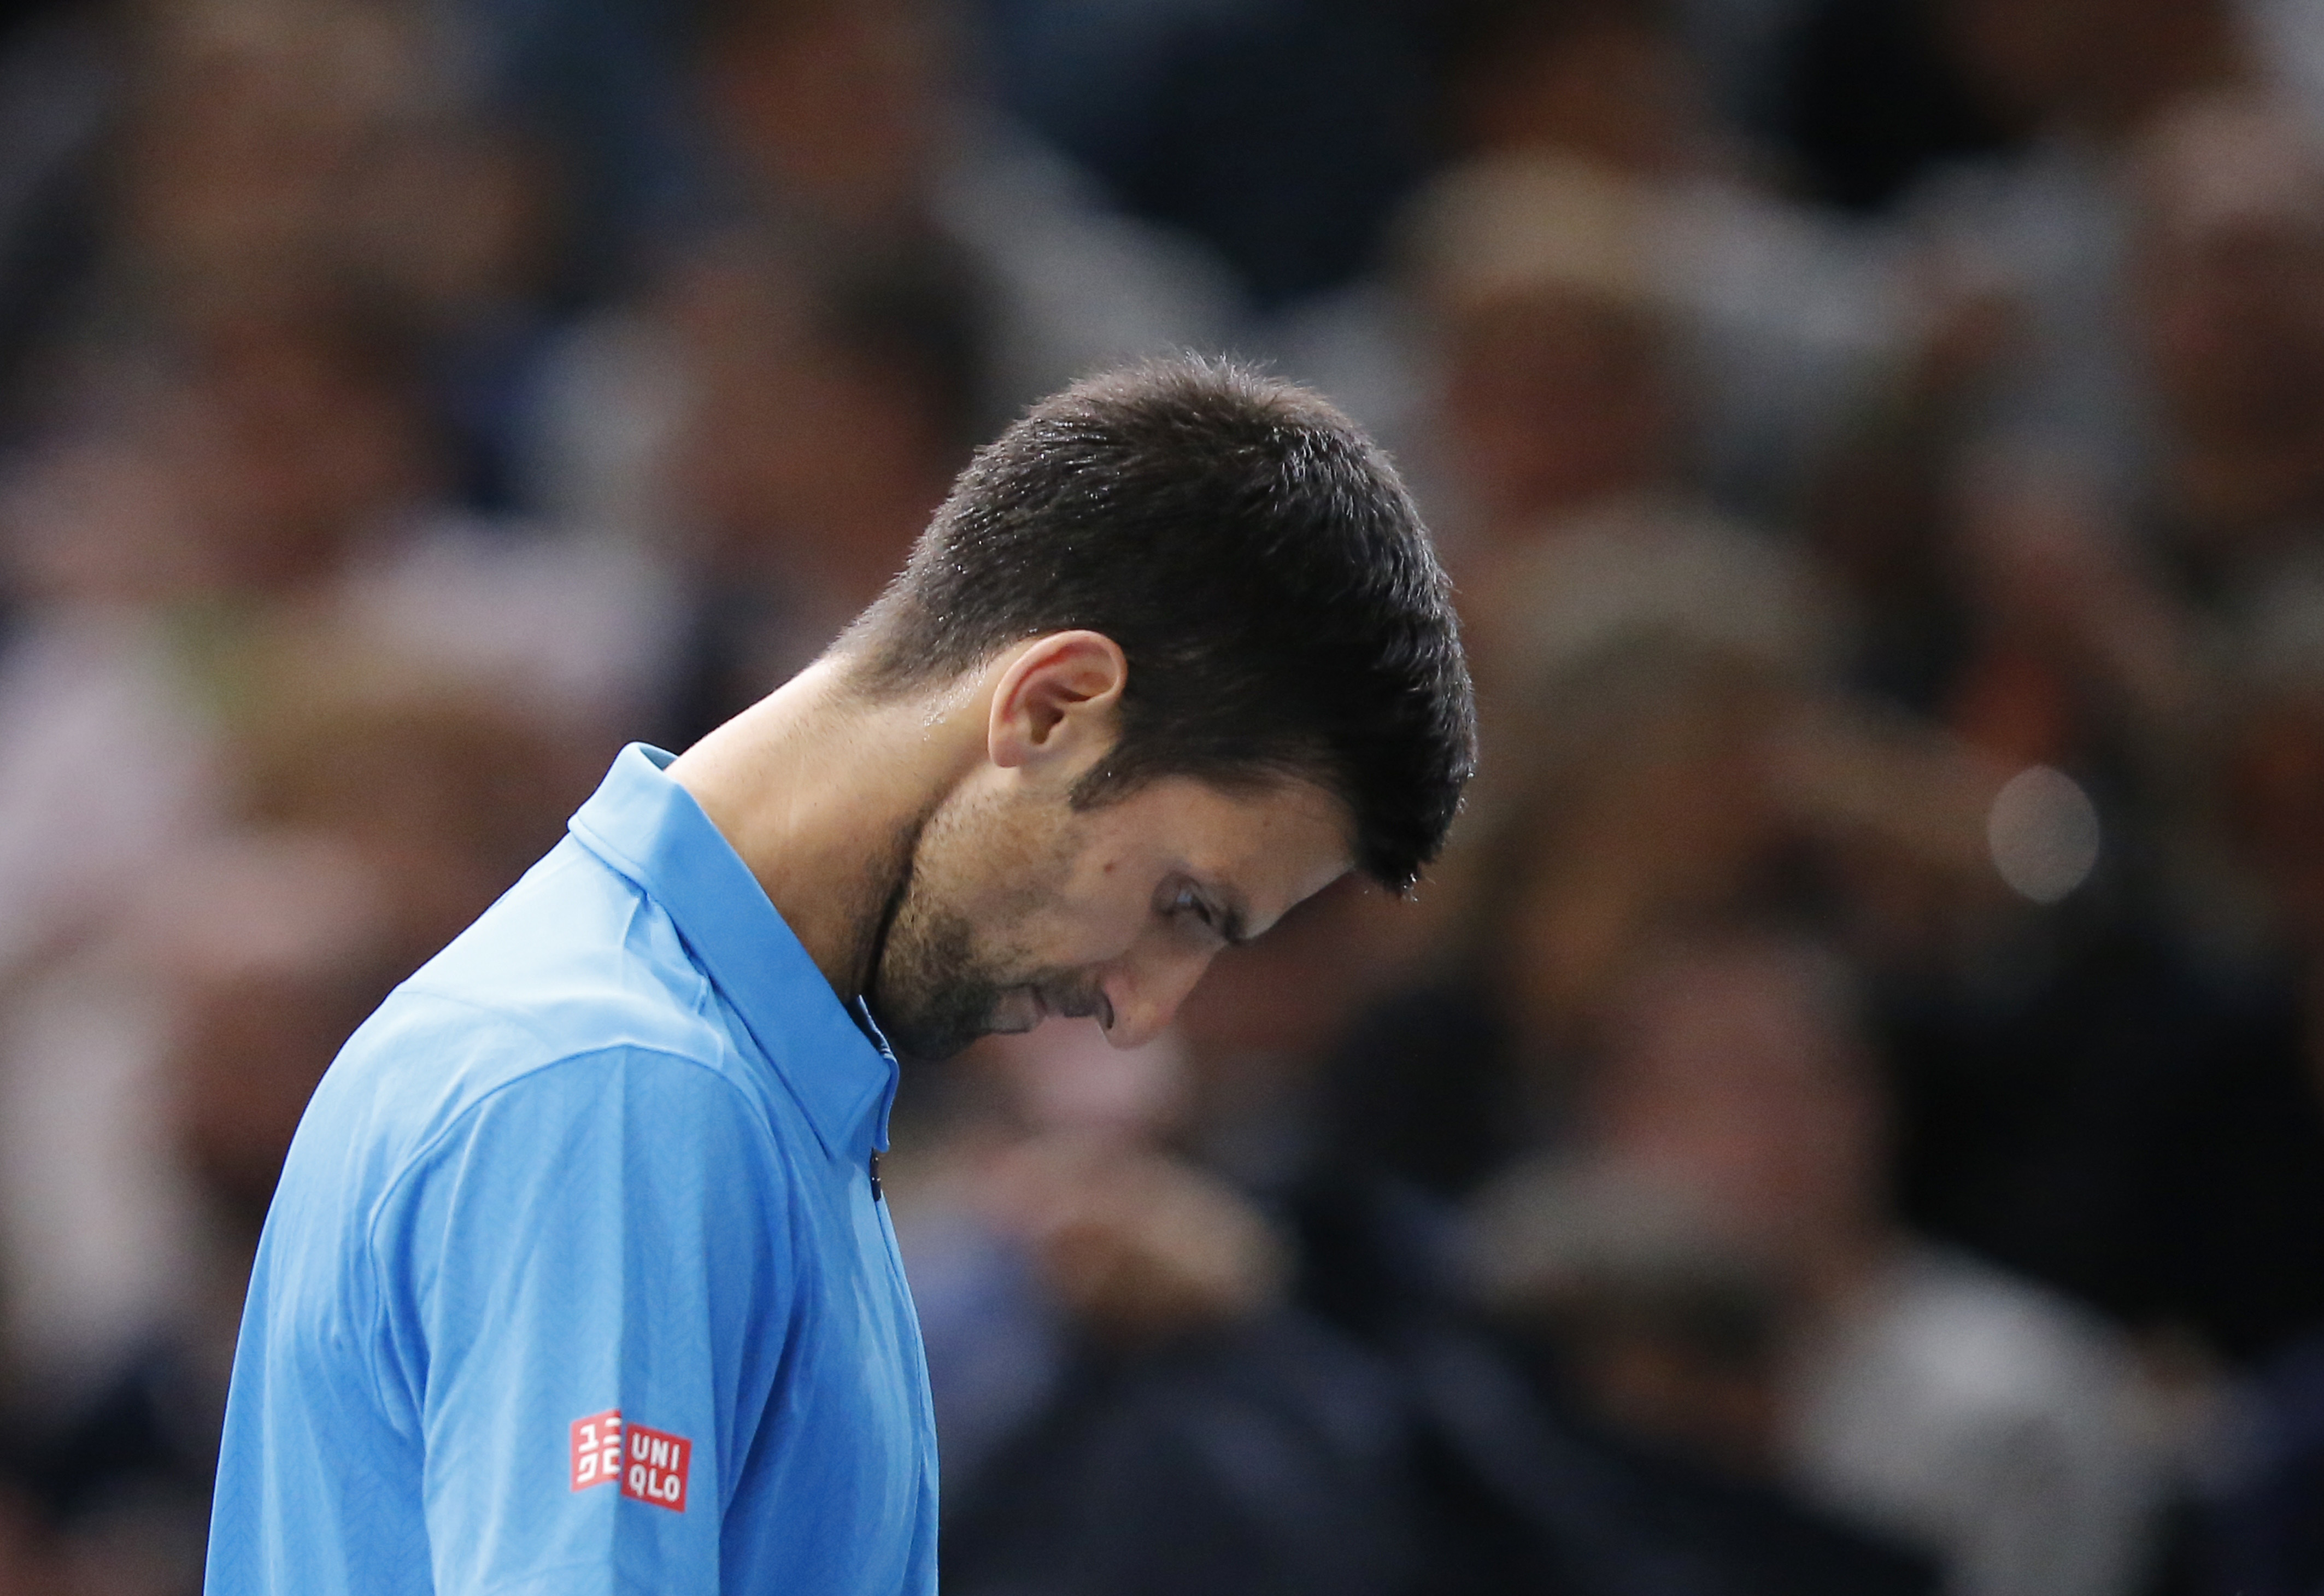 Novak Djokovic of Serbia reacts after loosing a point against Marin Cilic of Croatia during the quarterfinal match of the Paris Masters tennis tournament at the Bercy Arena in Paris, Friday, Nov. 4, 2016. Cilic won 6-4, 7-6. (AP Photo/Michel Euler)